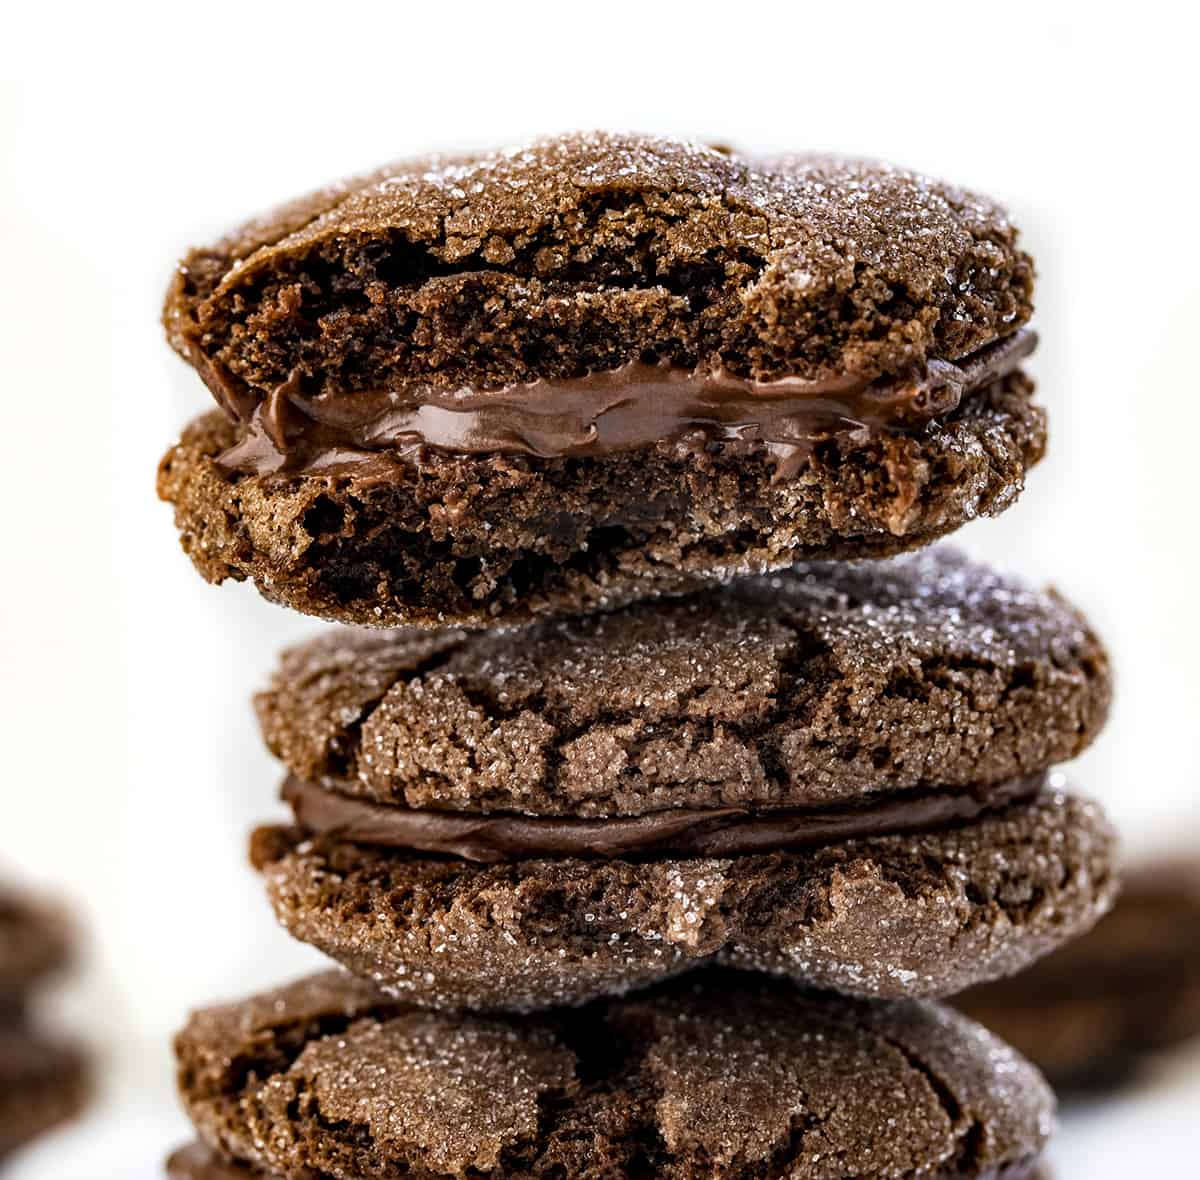 Stack of Chocolate Sandwich Cookies.